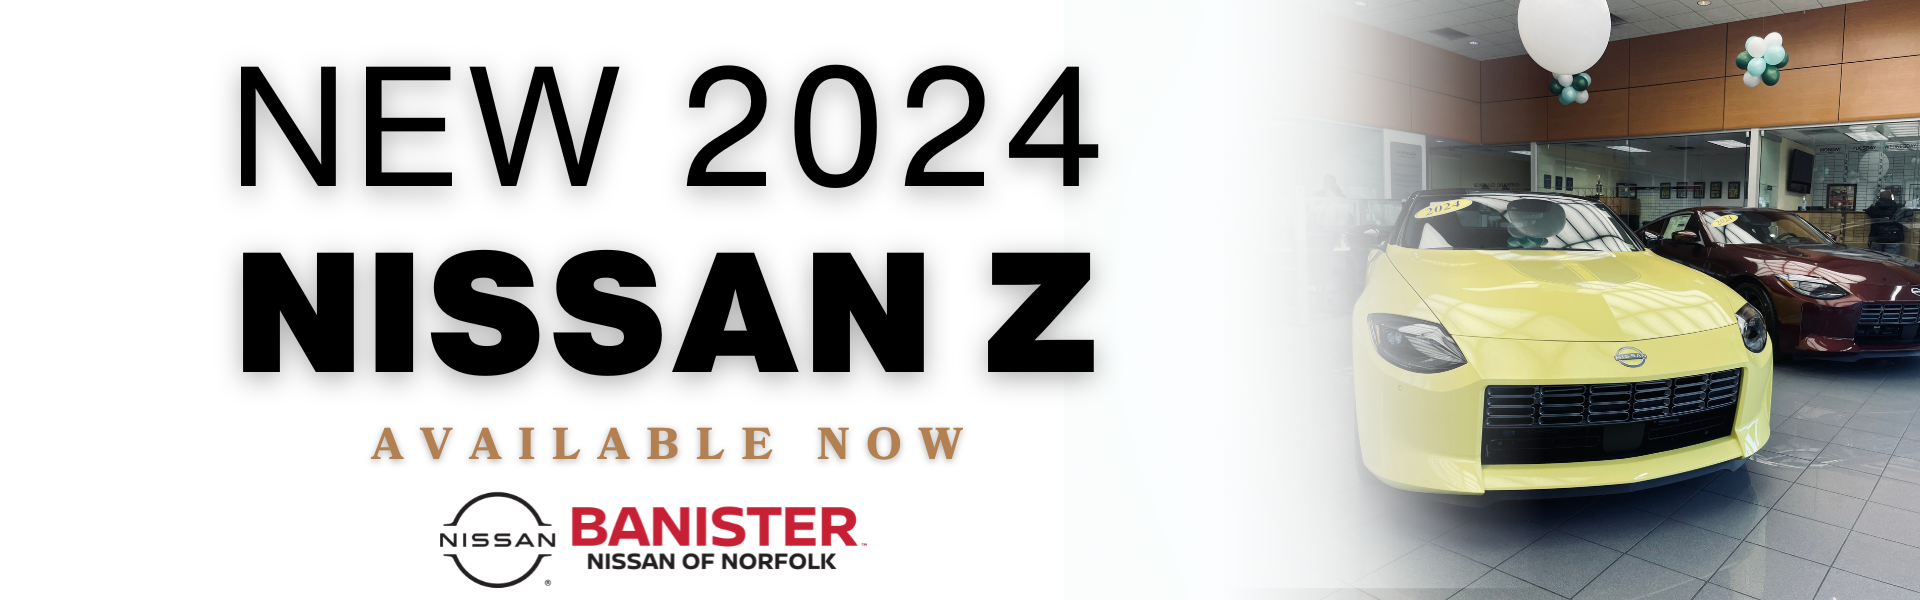 2024 Nissan Z is Available at Banister Nissan of Norfolk!